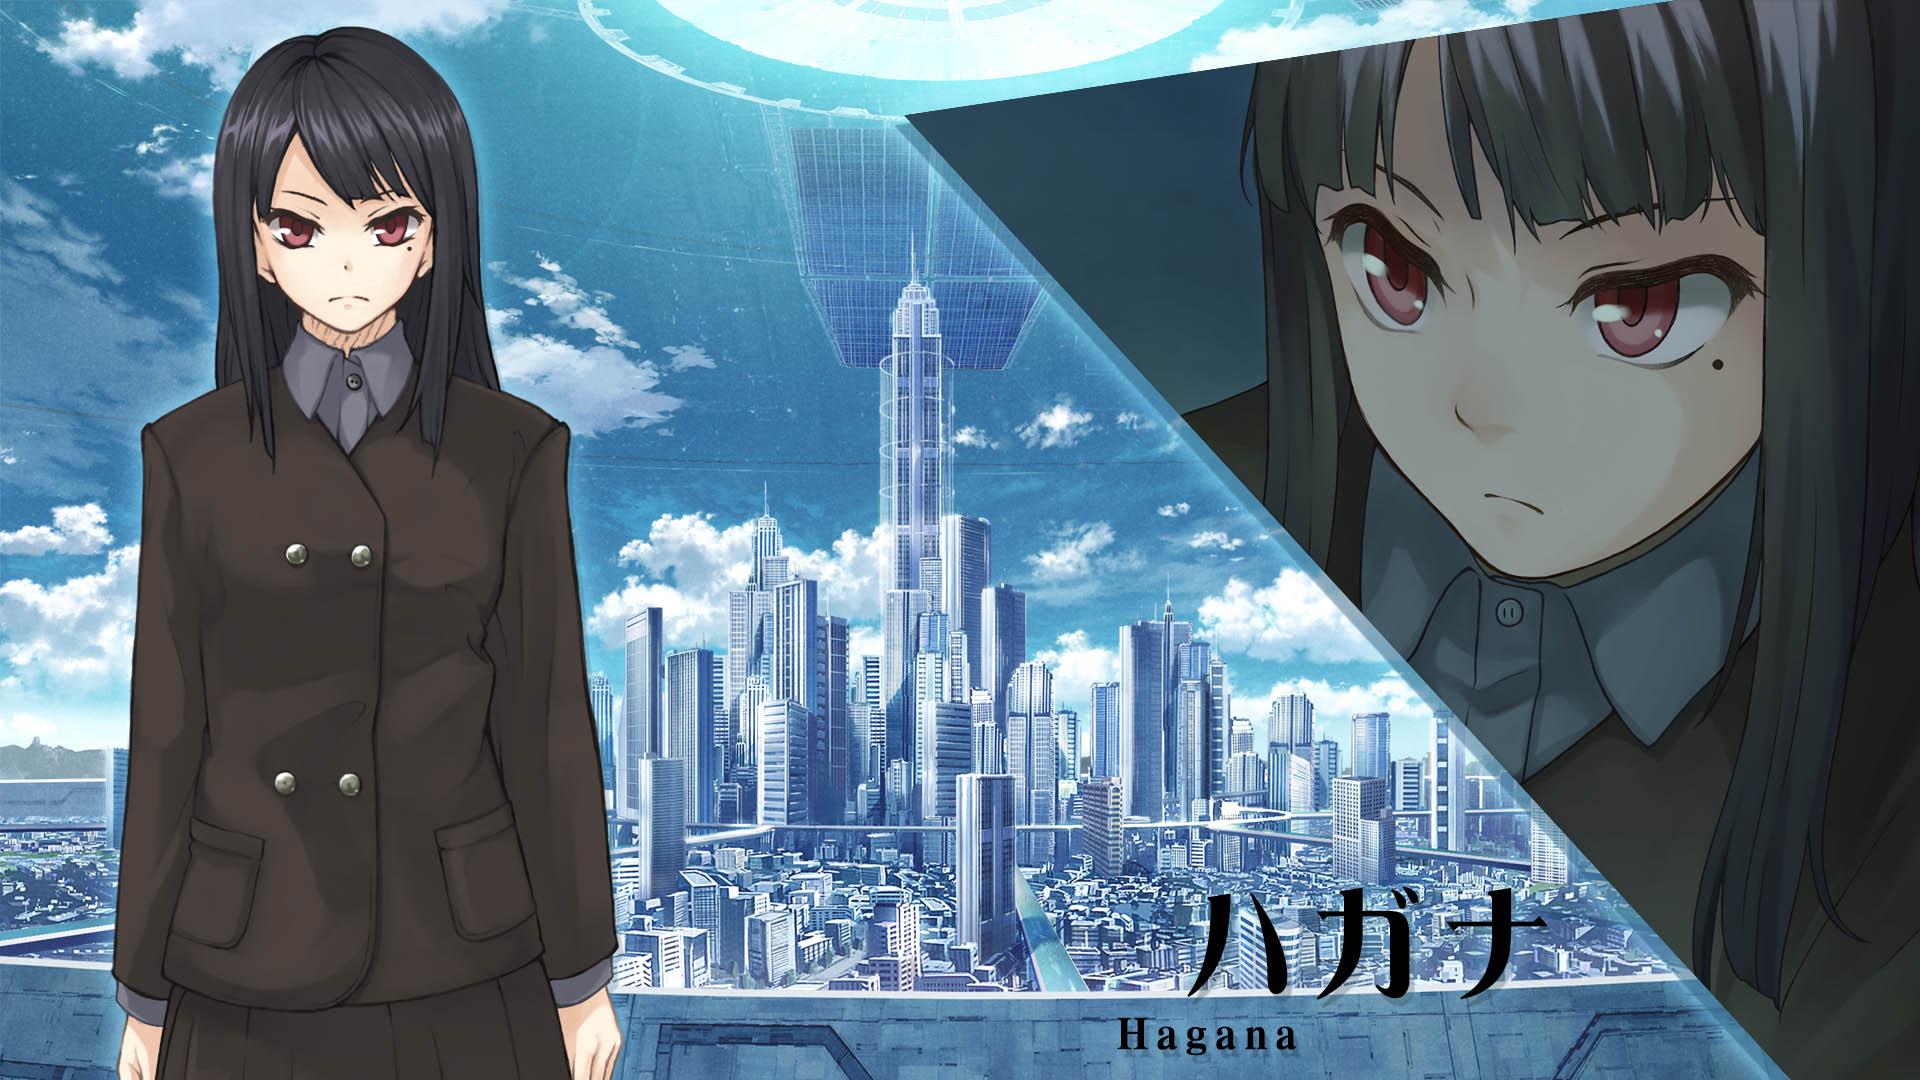 Hagana. Wallpaper from World End Economica